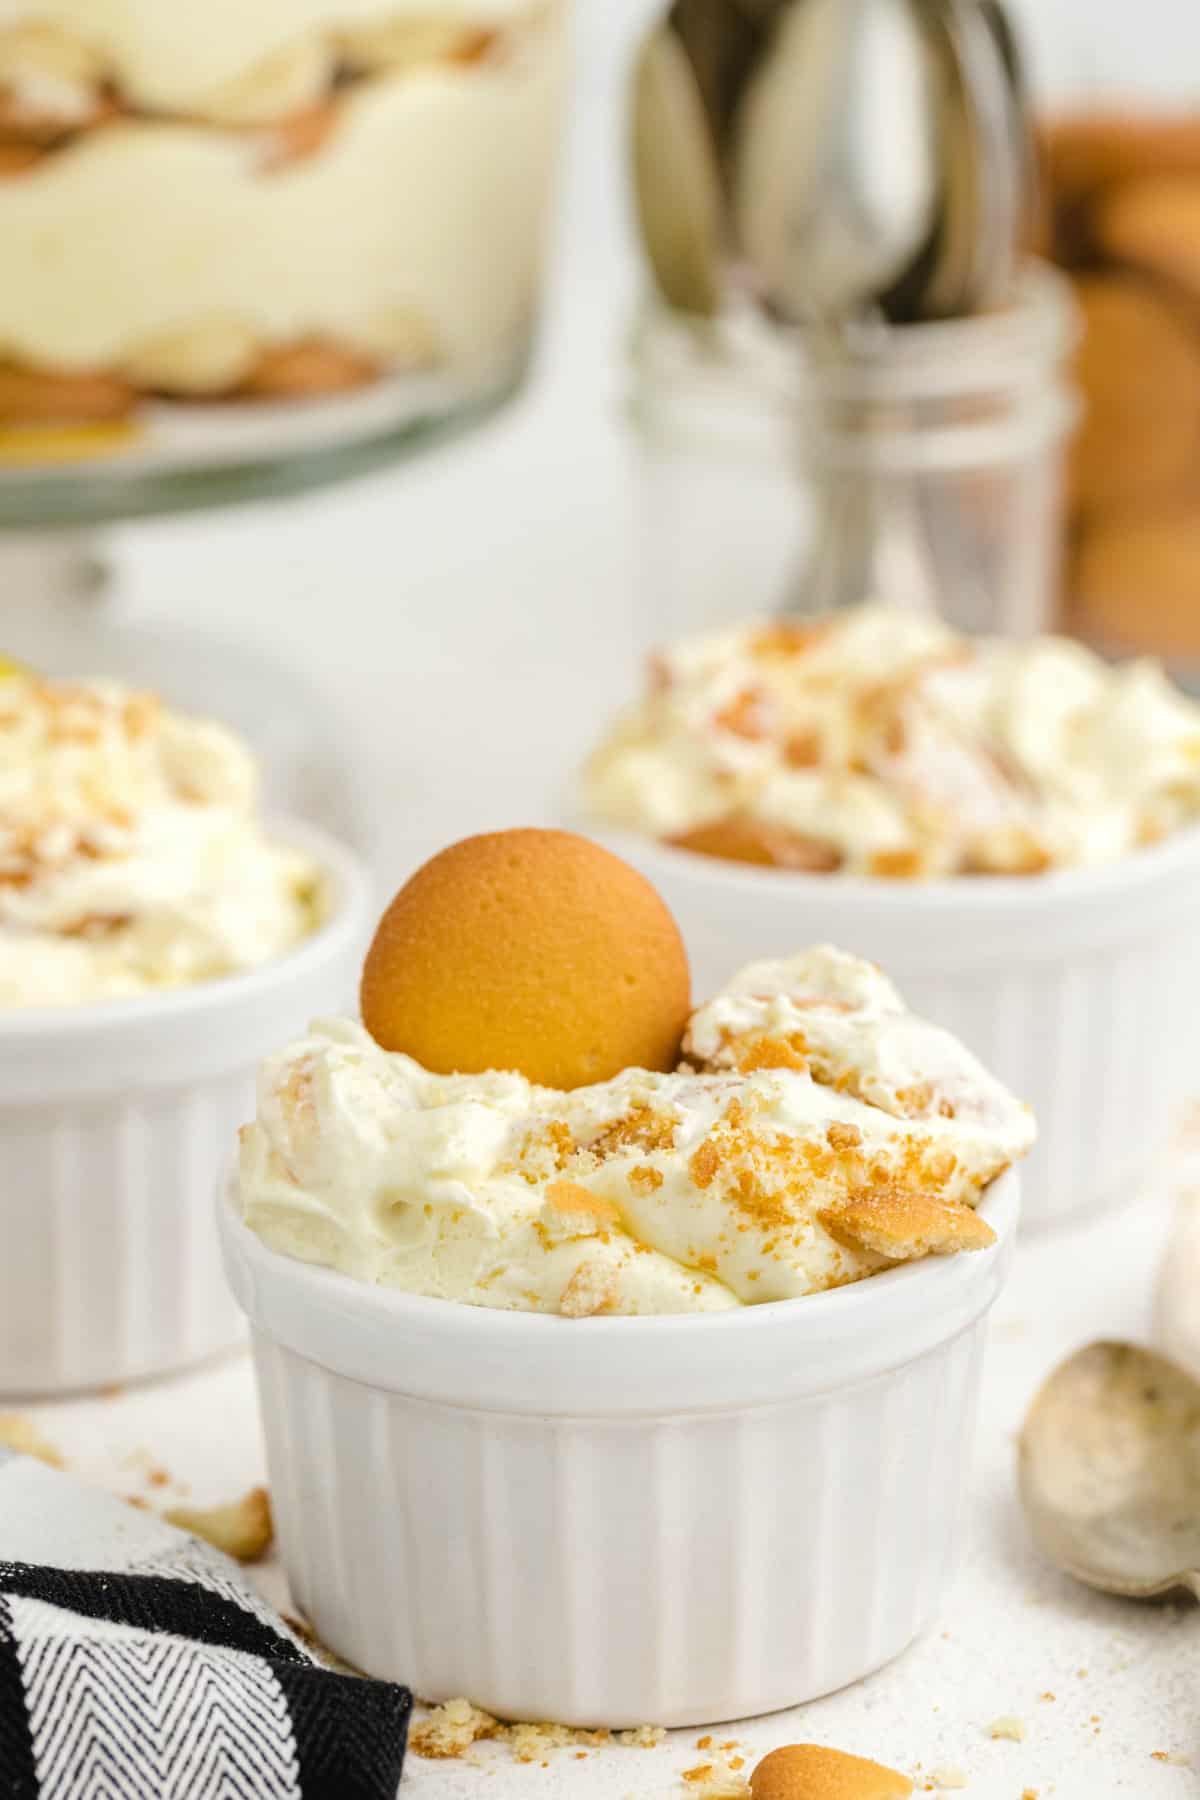 Banana Pudding served in individual serving